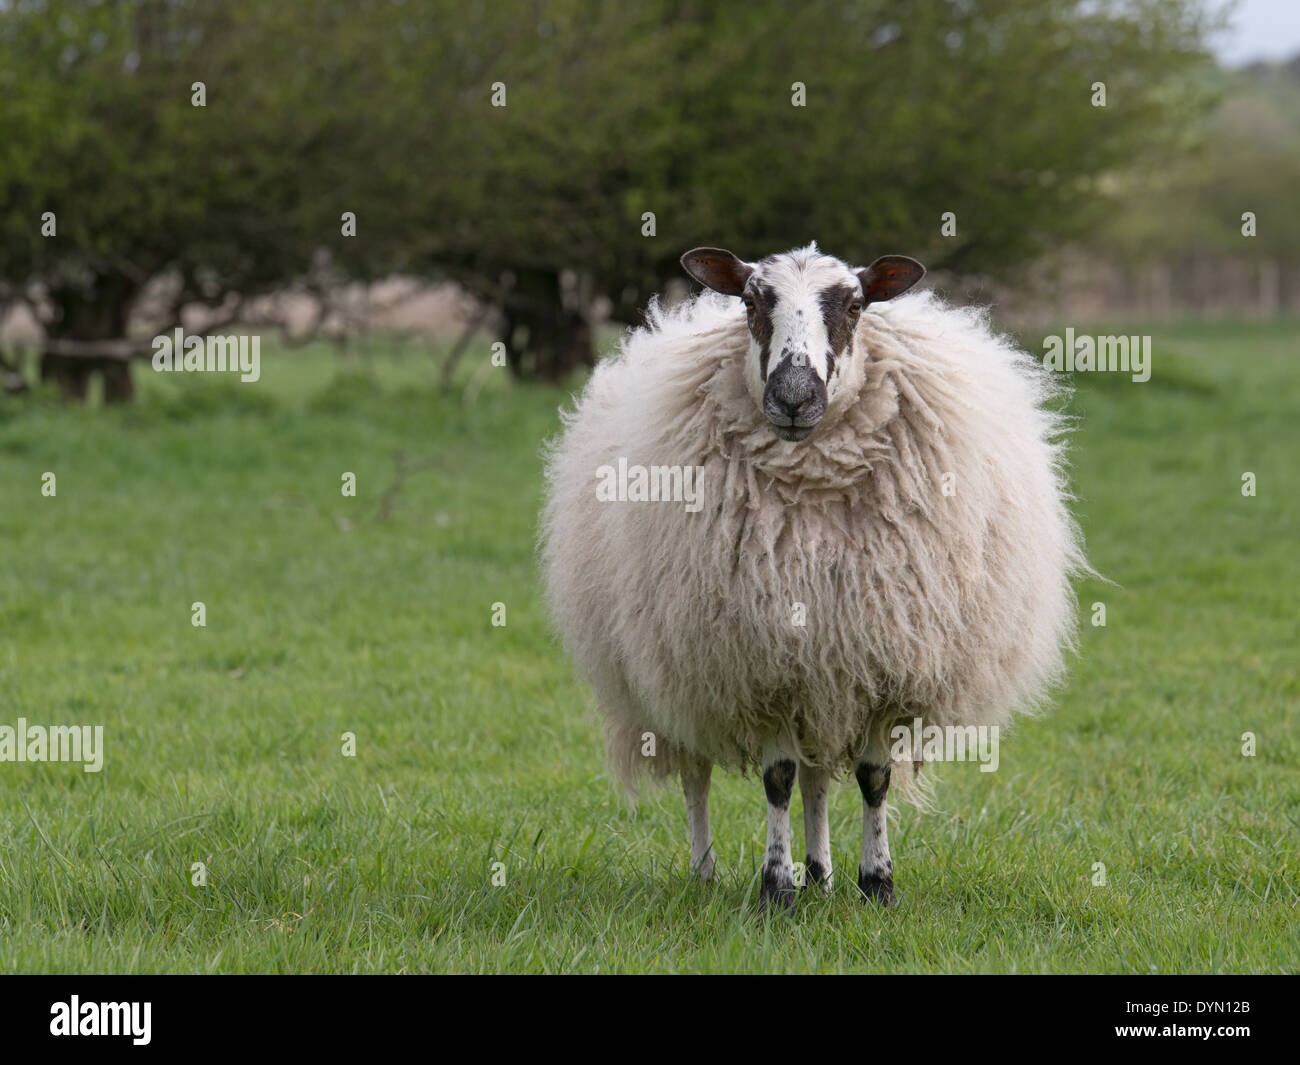 woolly sheep in standing in field Stock Photo